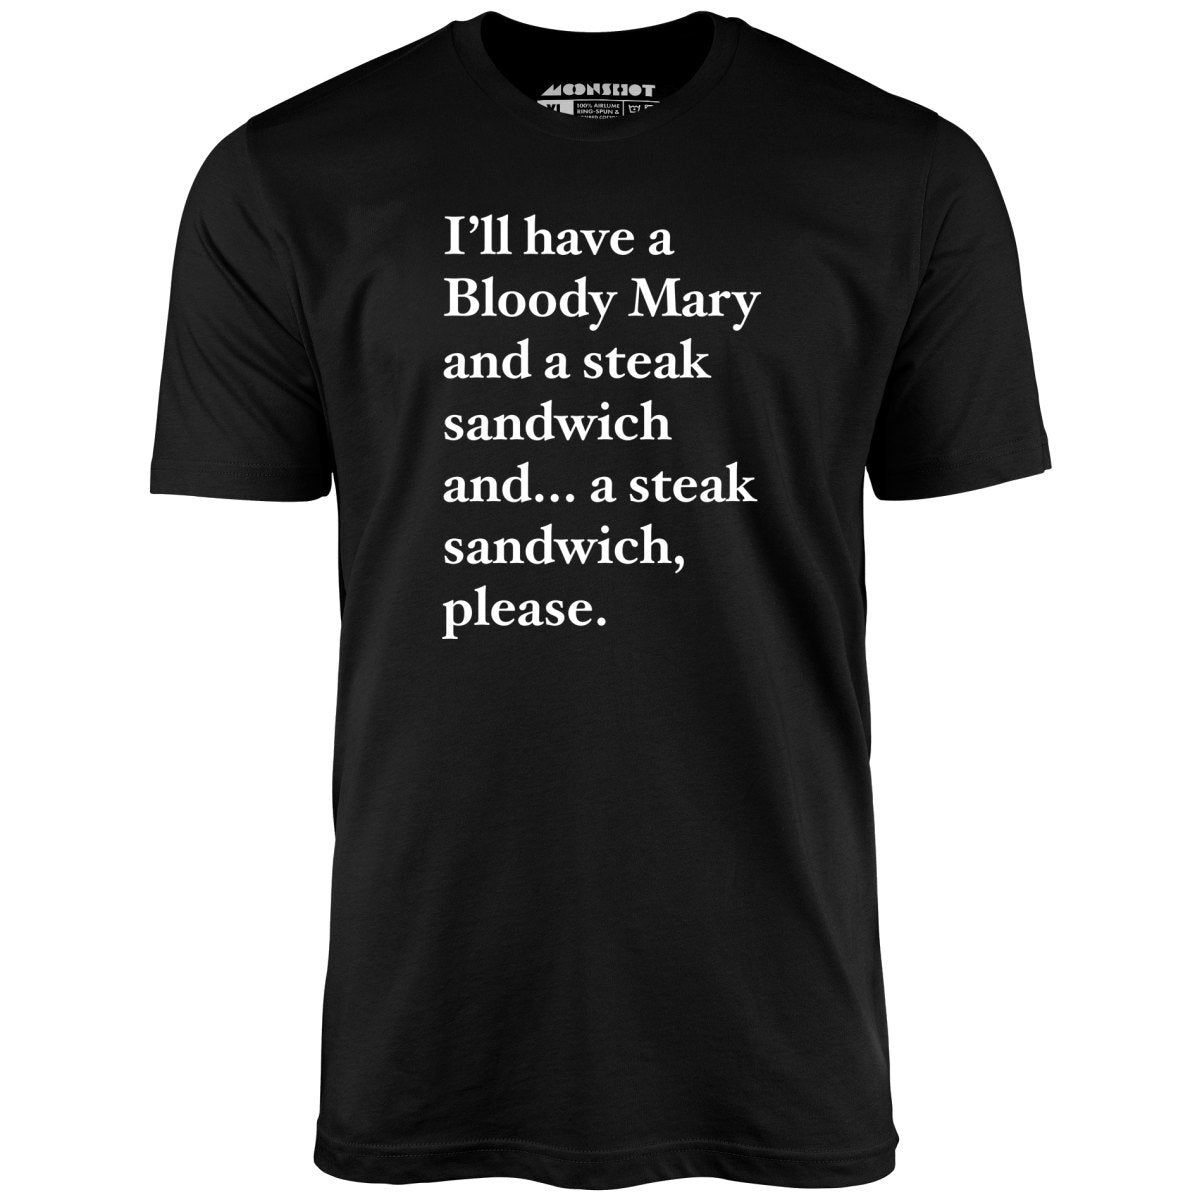 Bloody Mary and a Steak Sandwich - Unisex T-Shirt